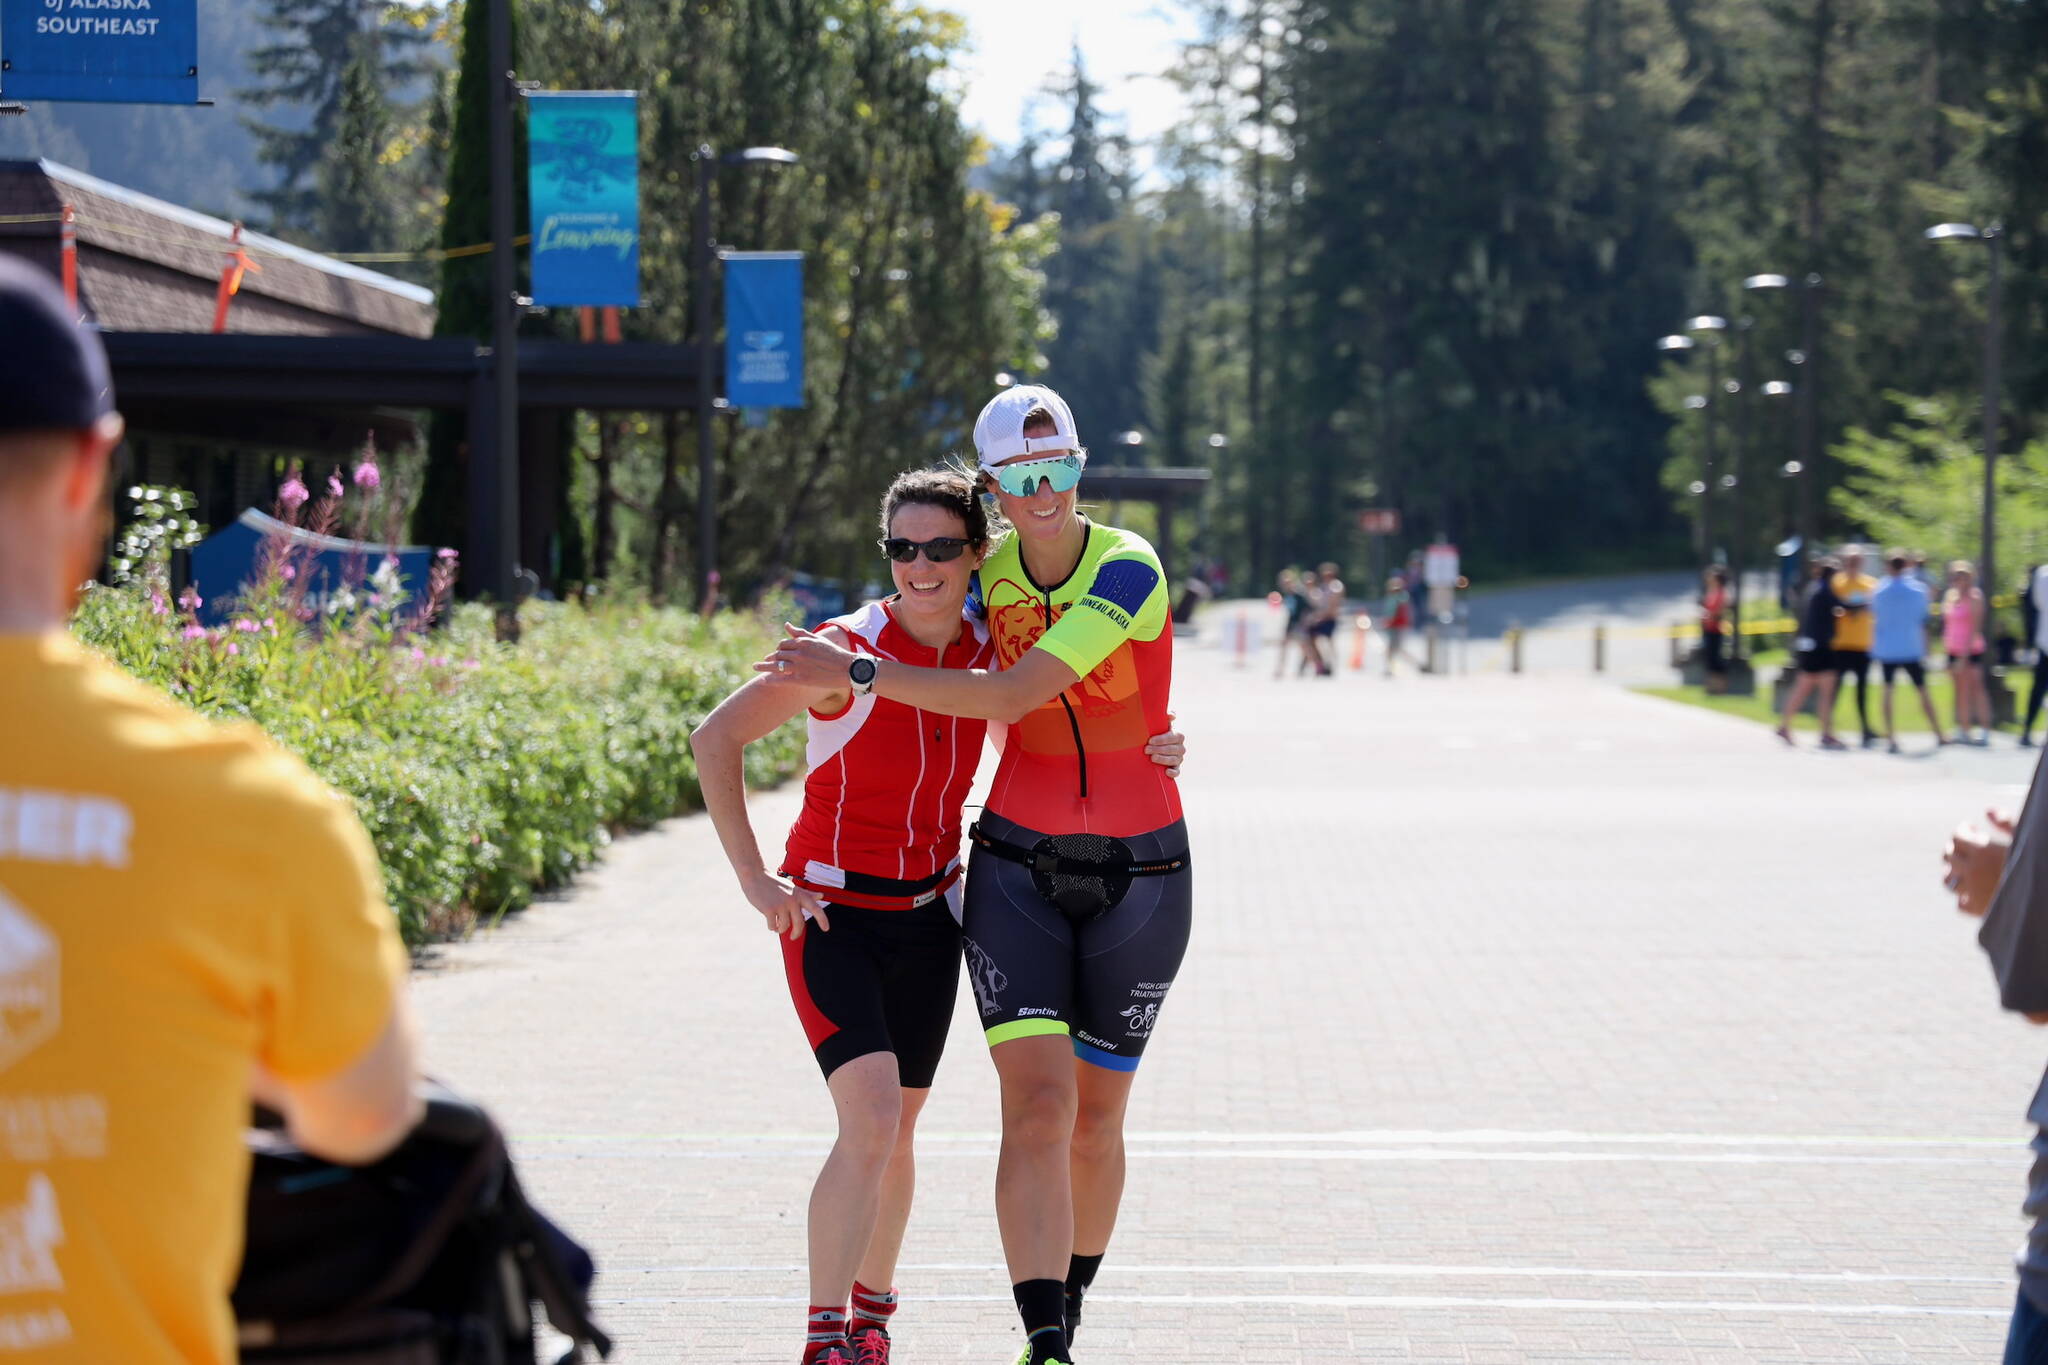 April Rezendes (left) and Jenna Wiersma (right) embrace at the finish line after completing the Aukeman Triathlon at the University of Alaska Southeast campus on Sunday. (Clarise Larson / Juneau Empire)